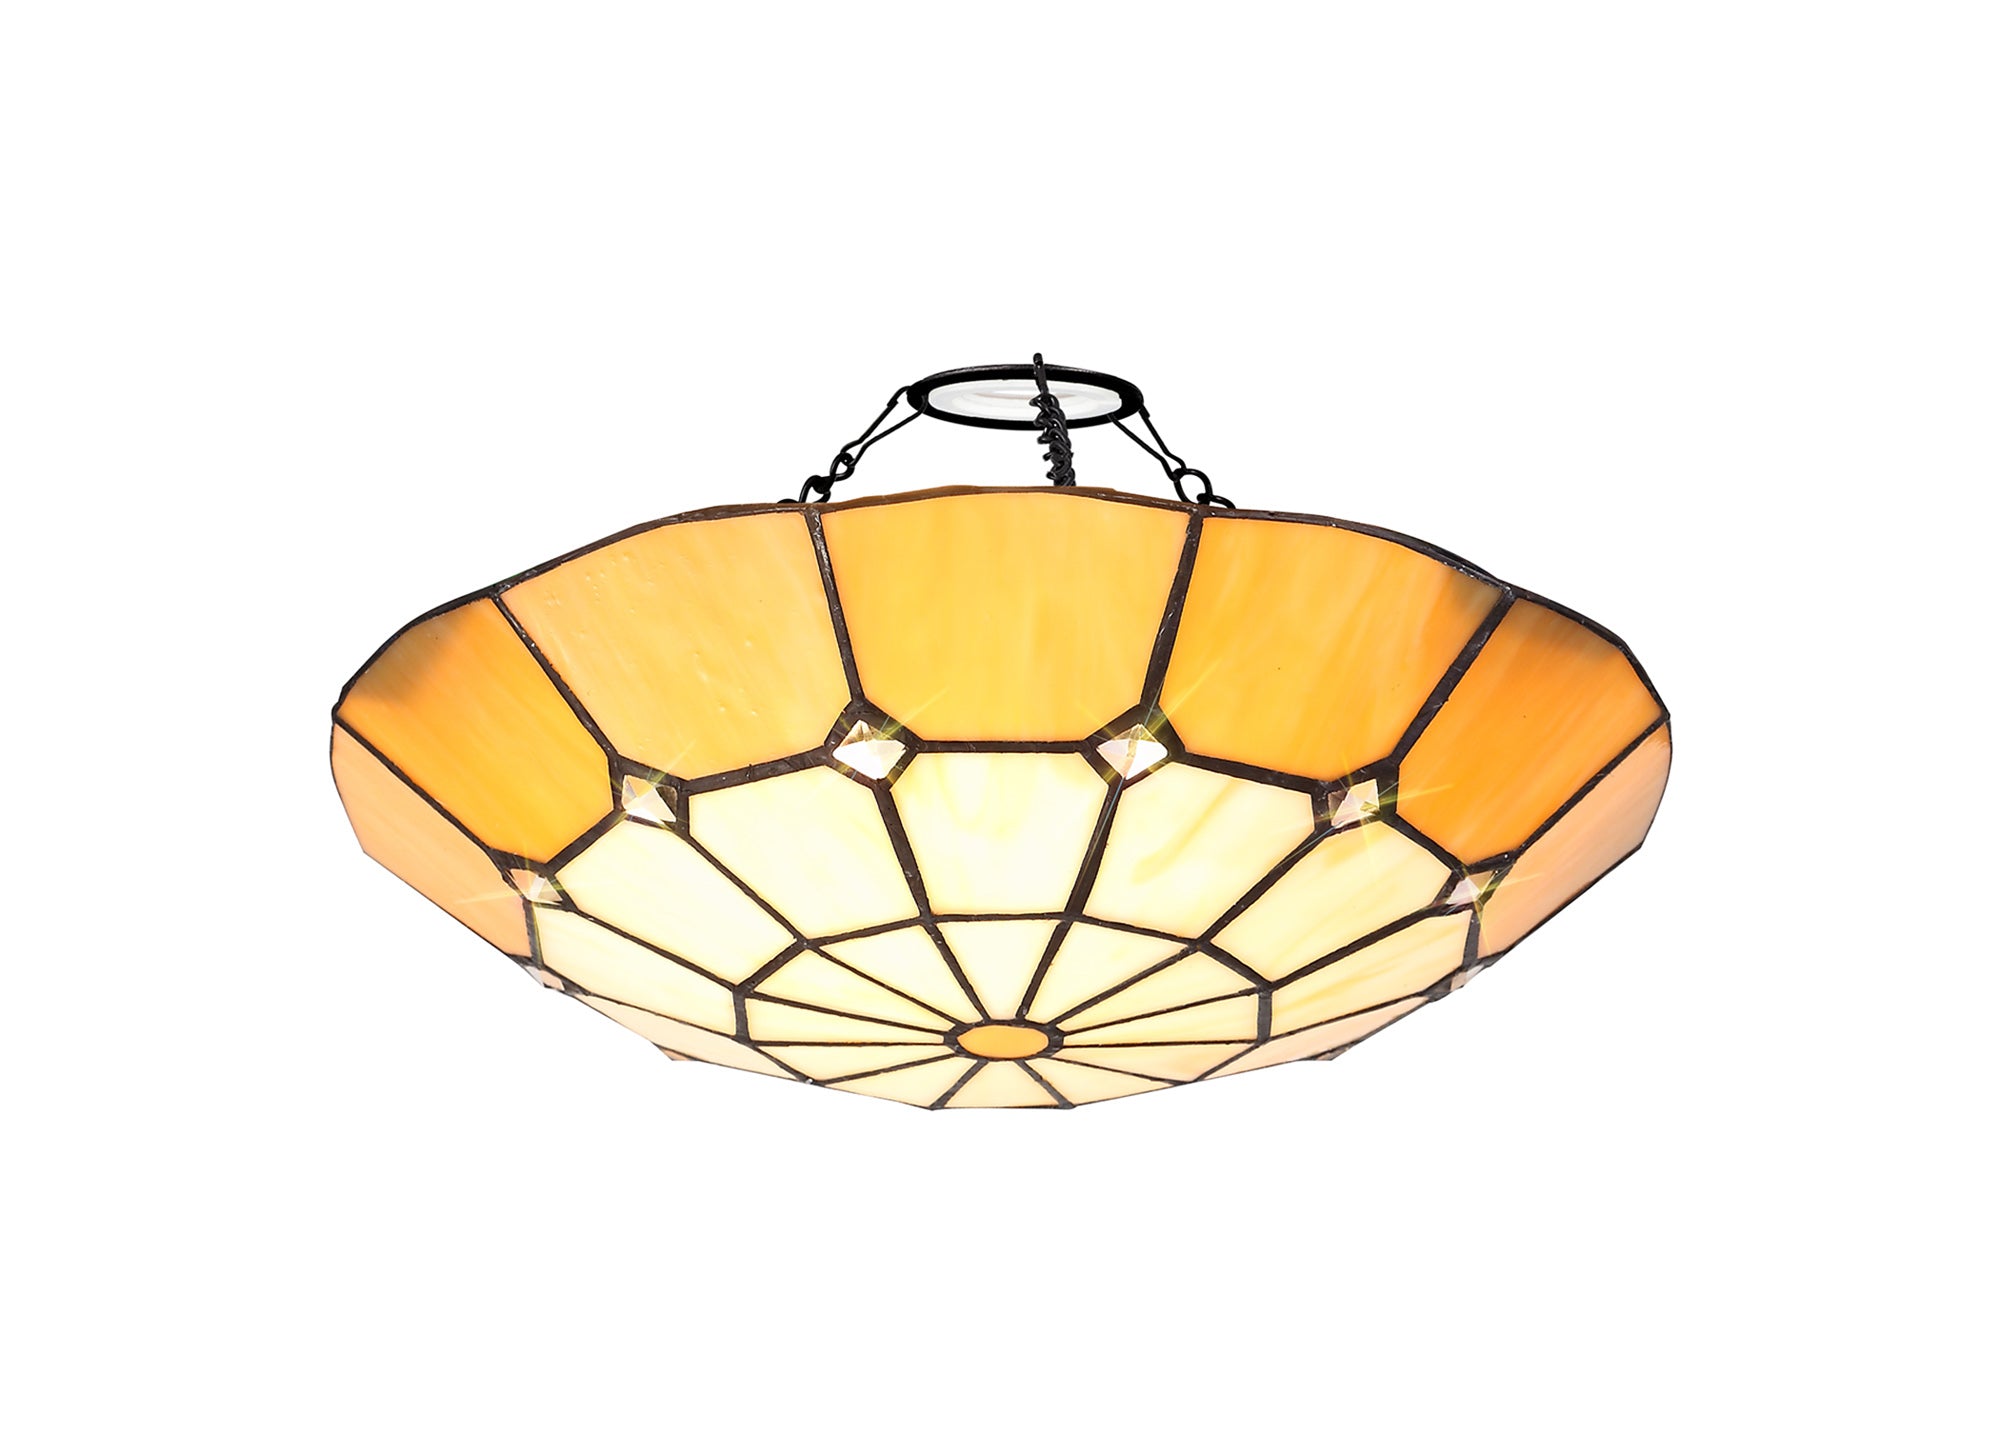 Austiffany, Tiffany 35cm Non-Electric Uplighter Shade, Crealm/Beige/Clear Crystal Centre/Aged Antique Brass Trim